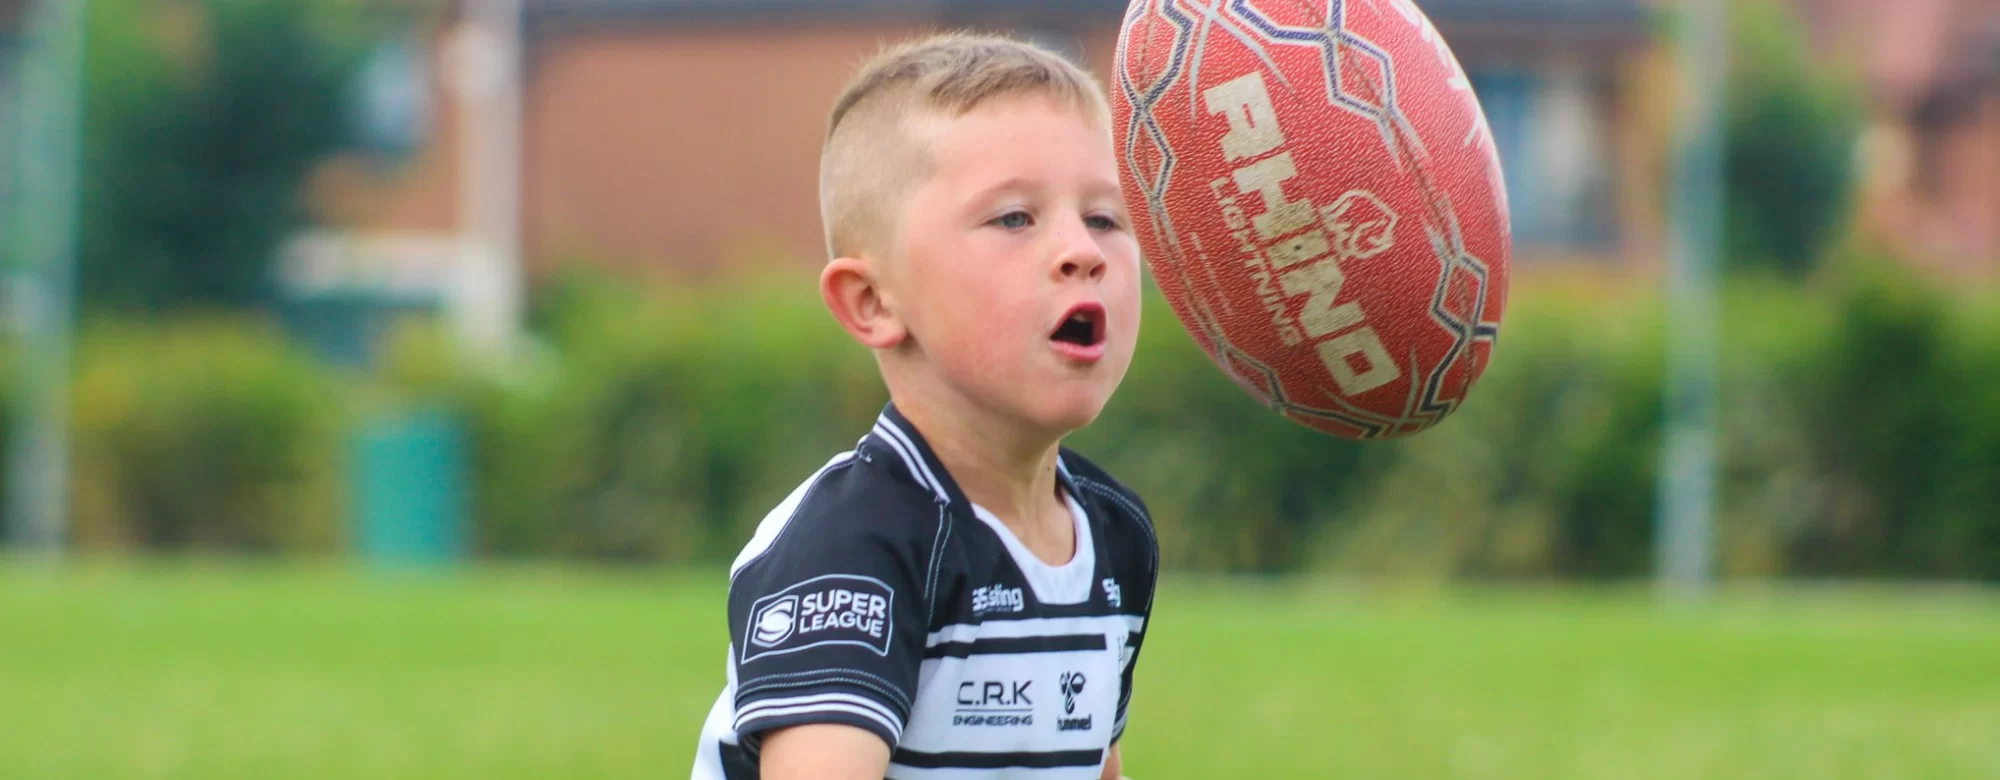 Hull FC Community Foundation’s February Half-Term Camps Confirmed